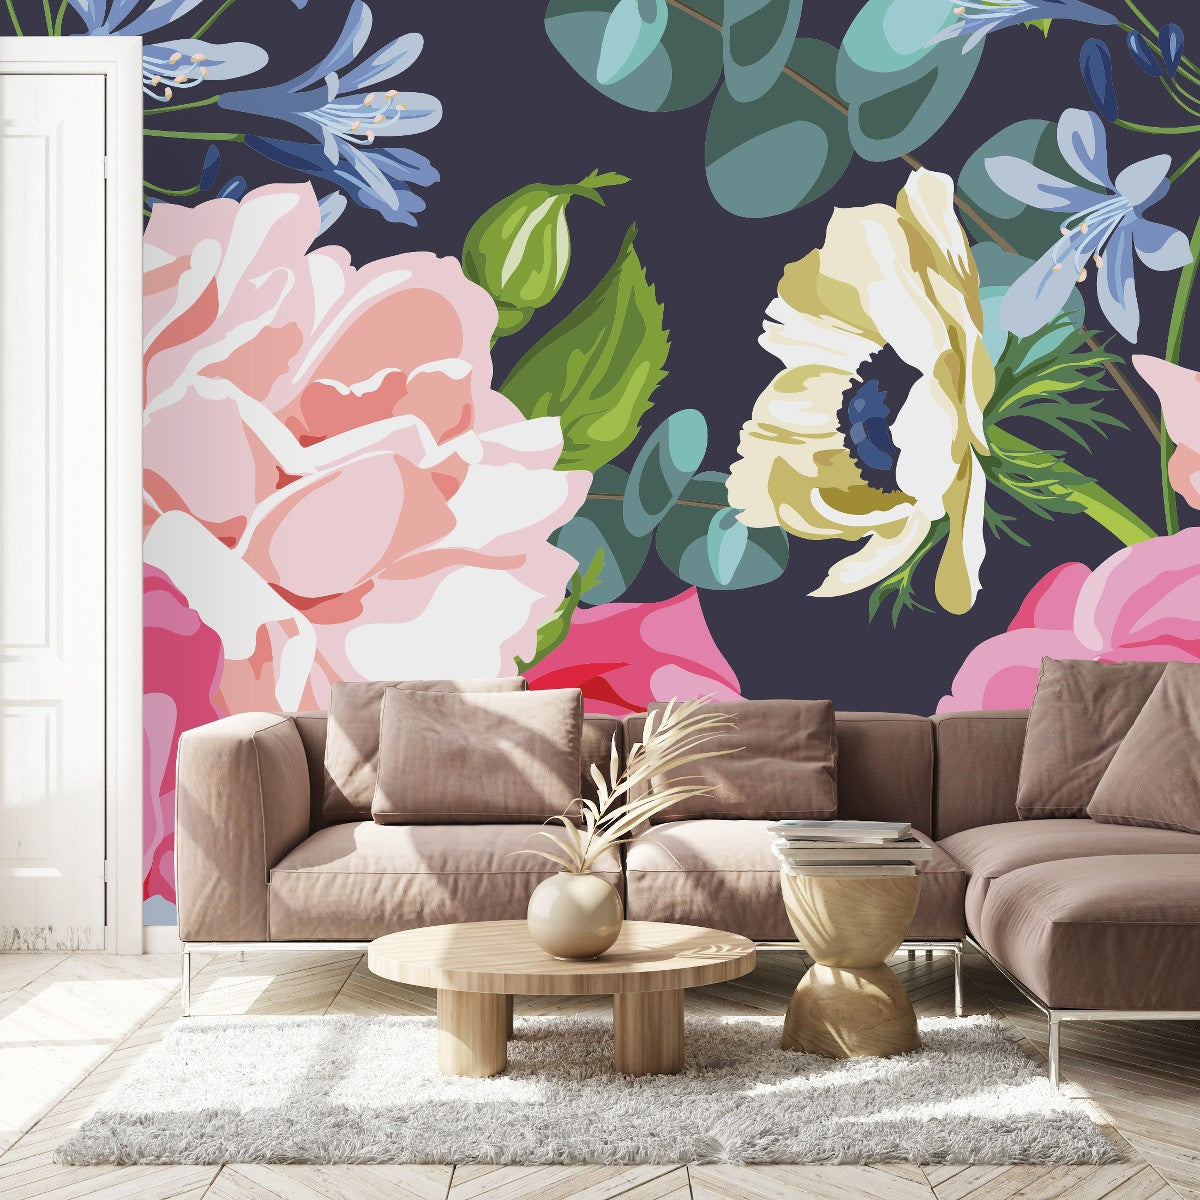 23 Modern Ways to Use Floral Wallpaper